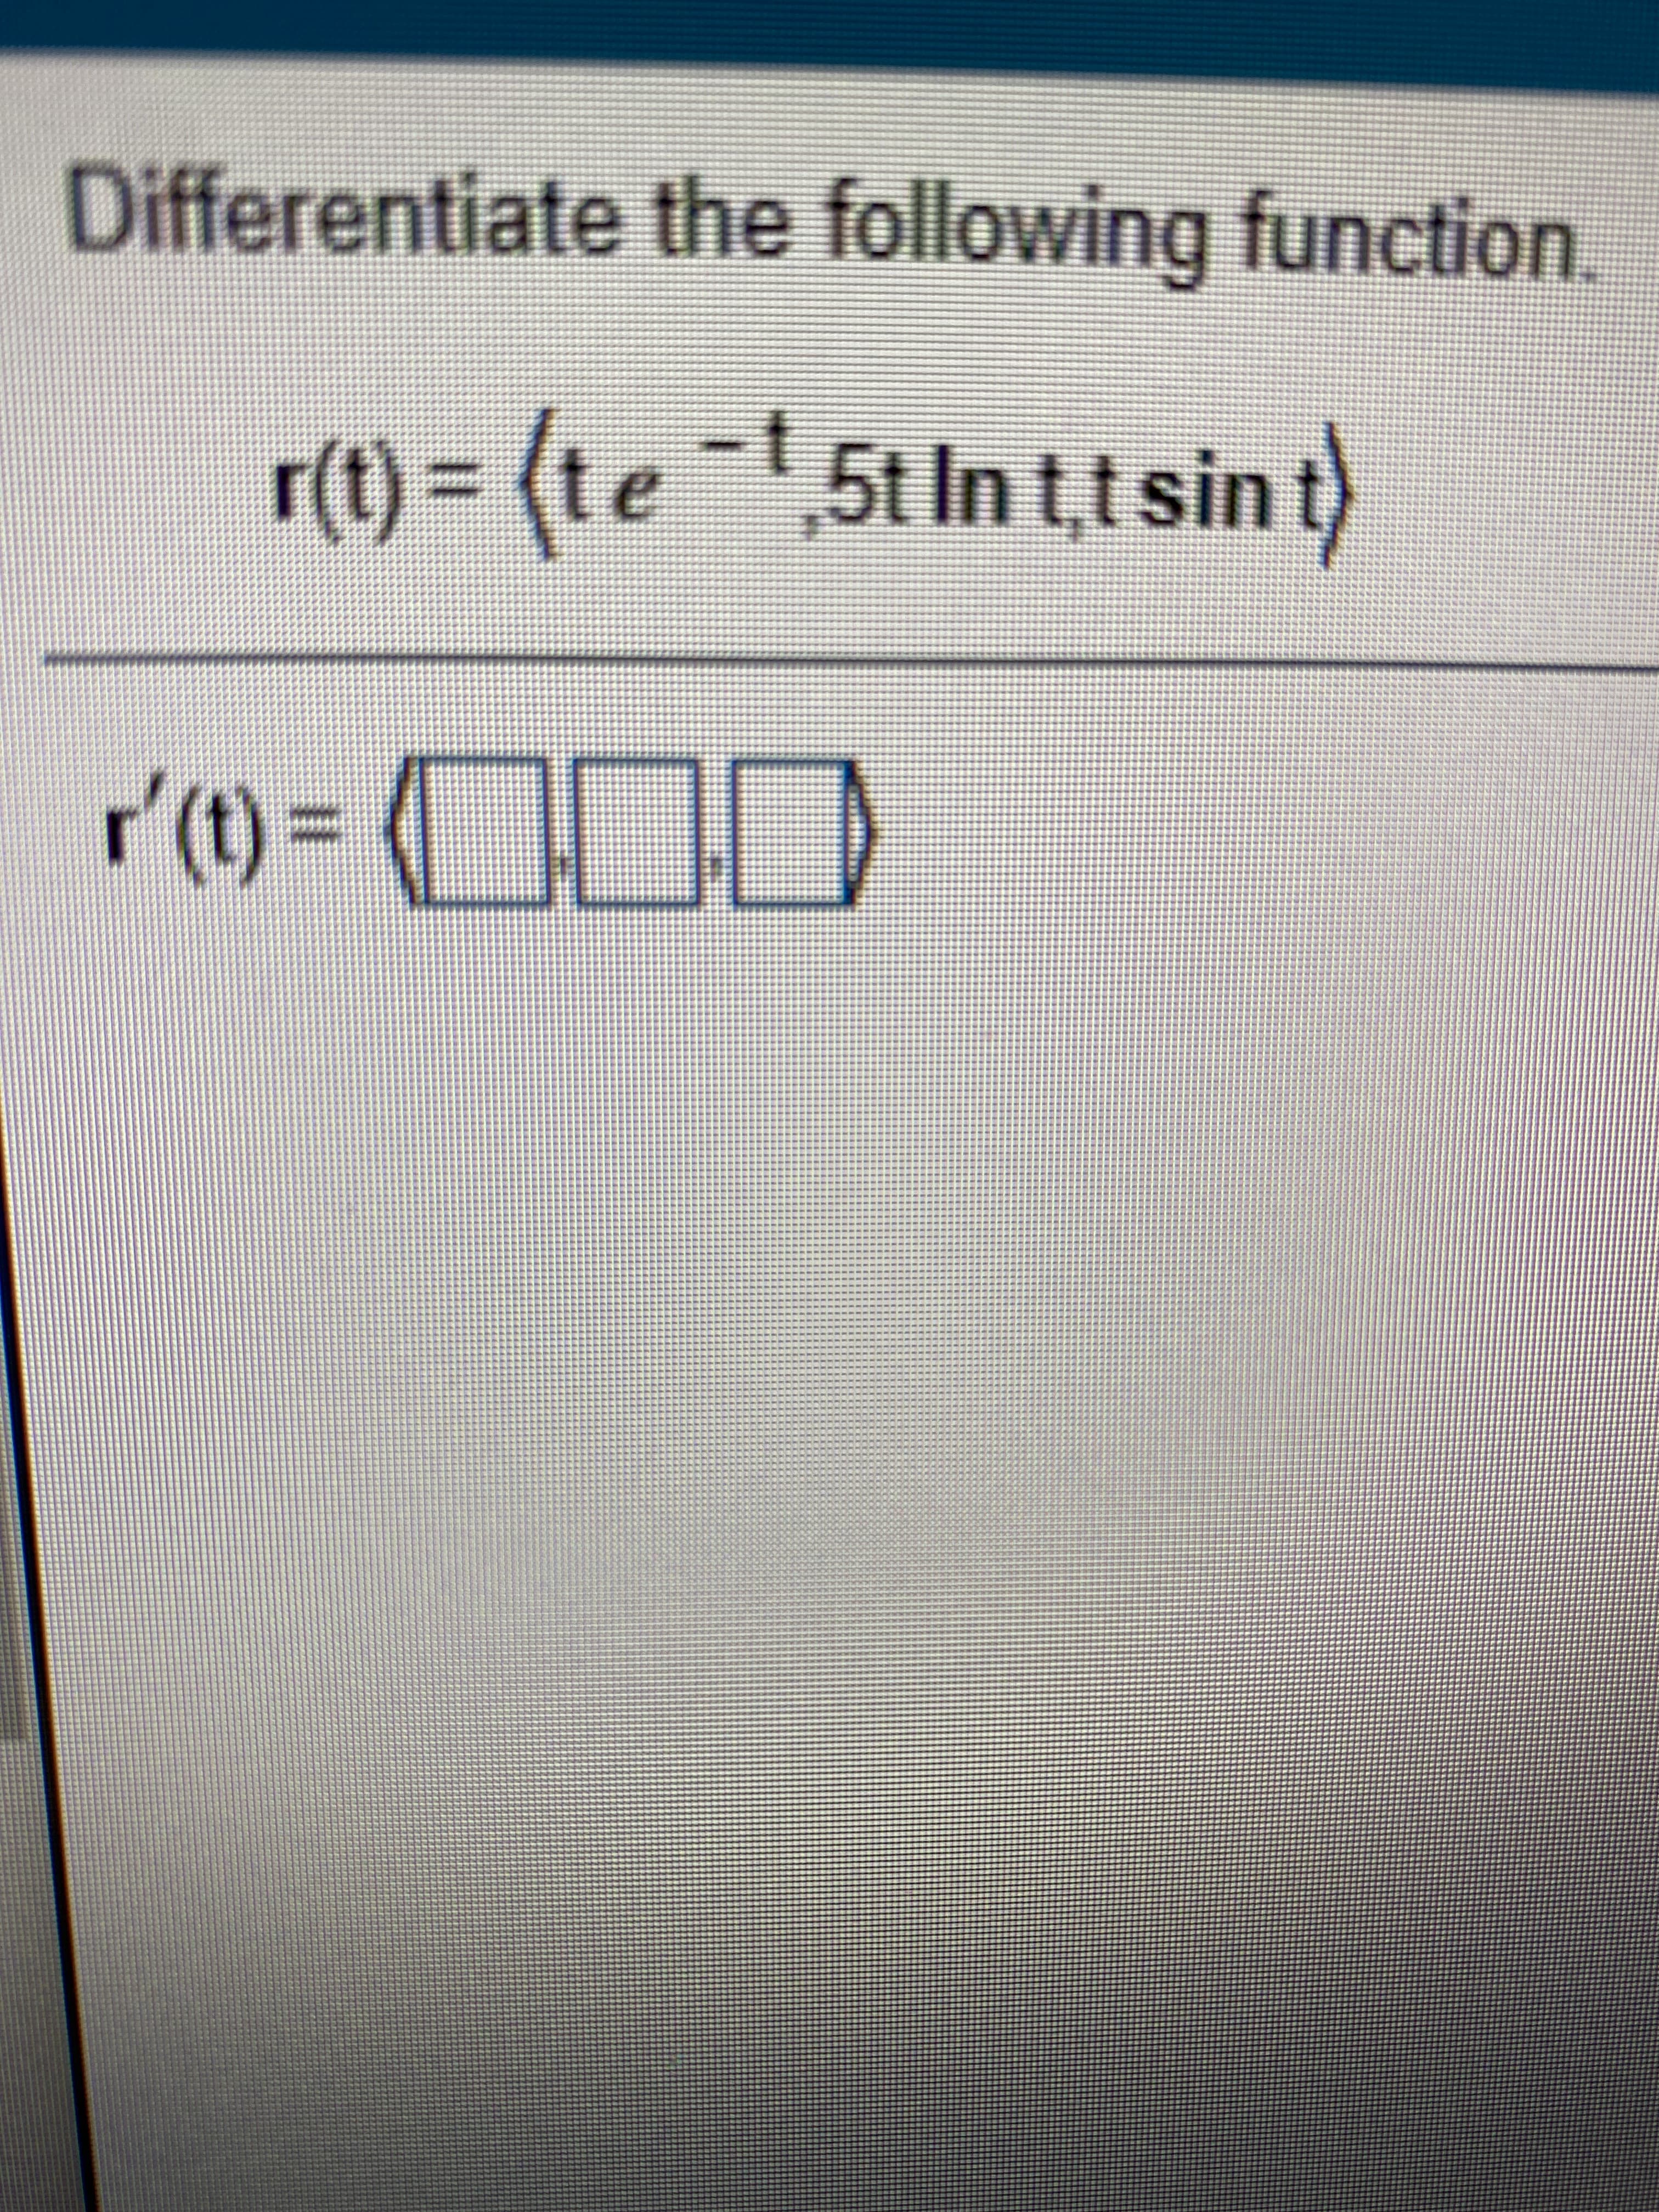 Differentiate the following function.
r(t) = (te ~!,5t In t,t sin t)
